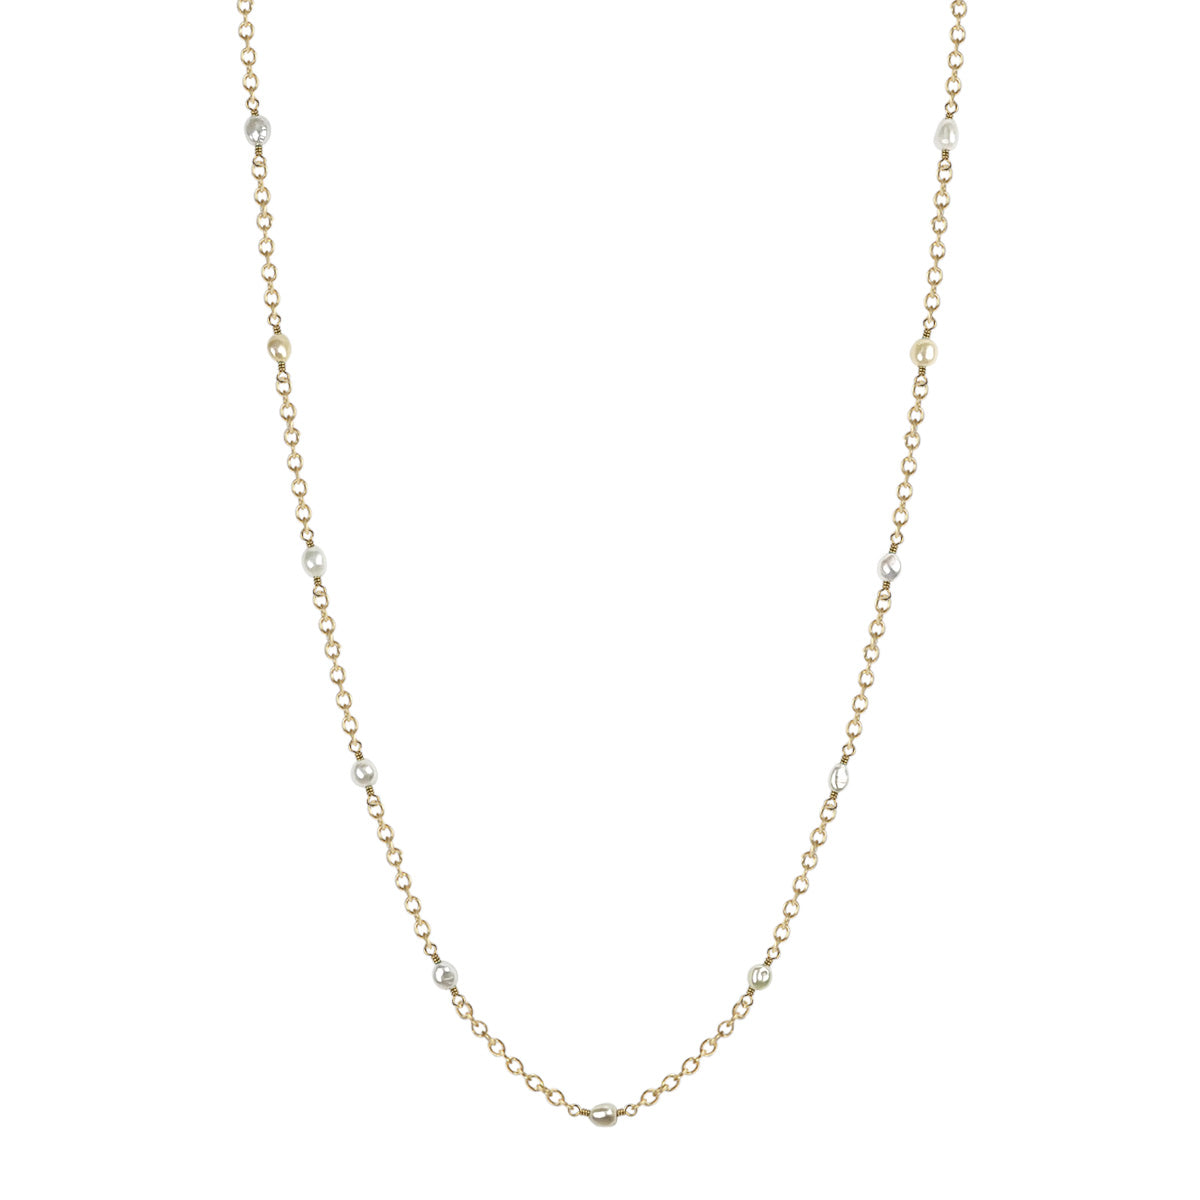 18K Gold White South Sea Keshi Pearls on Chain